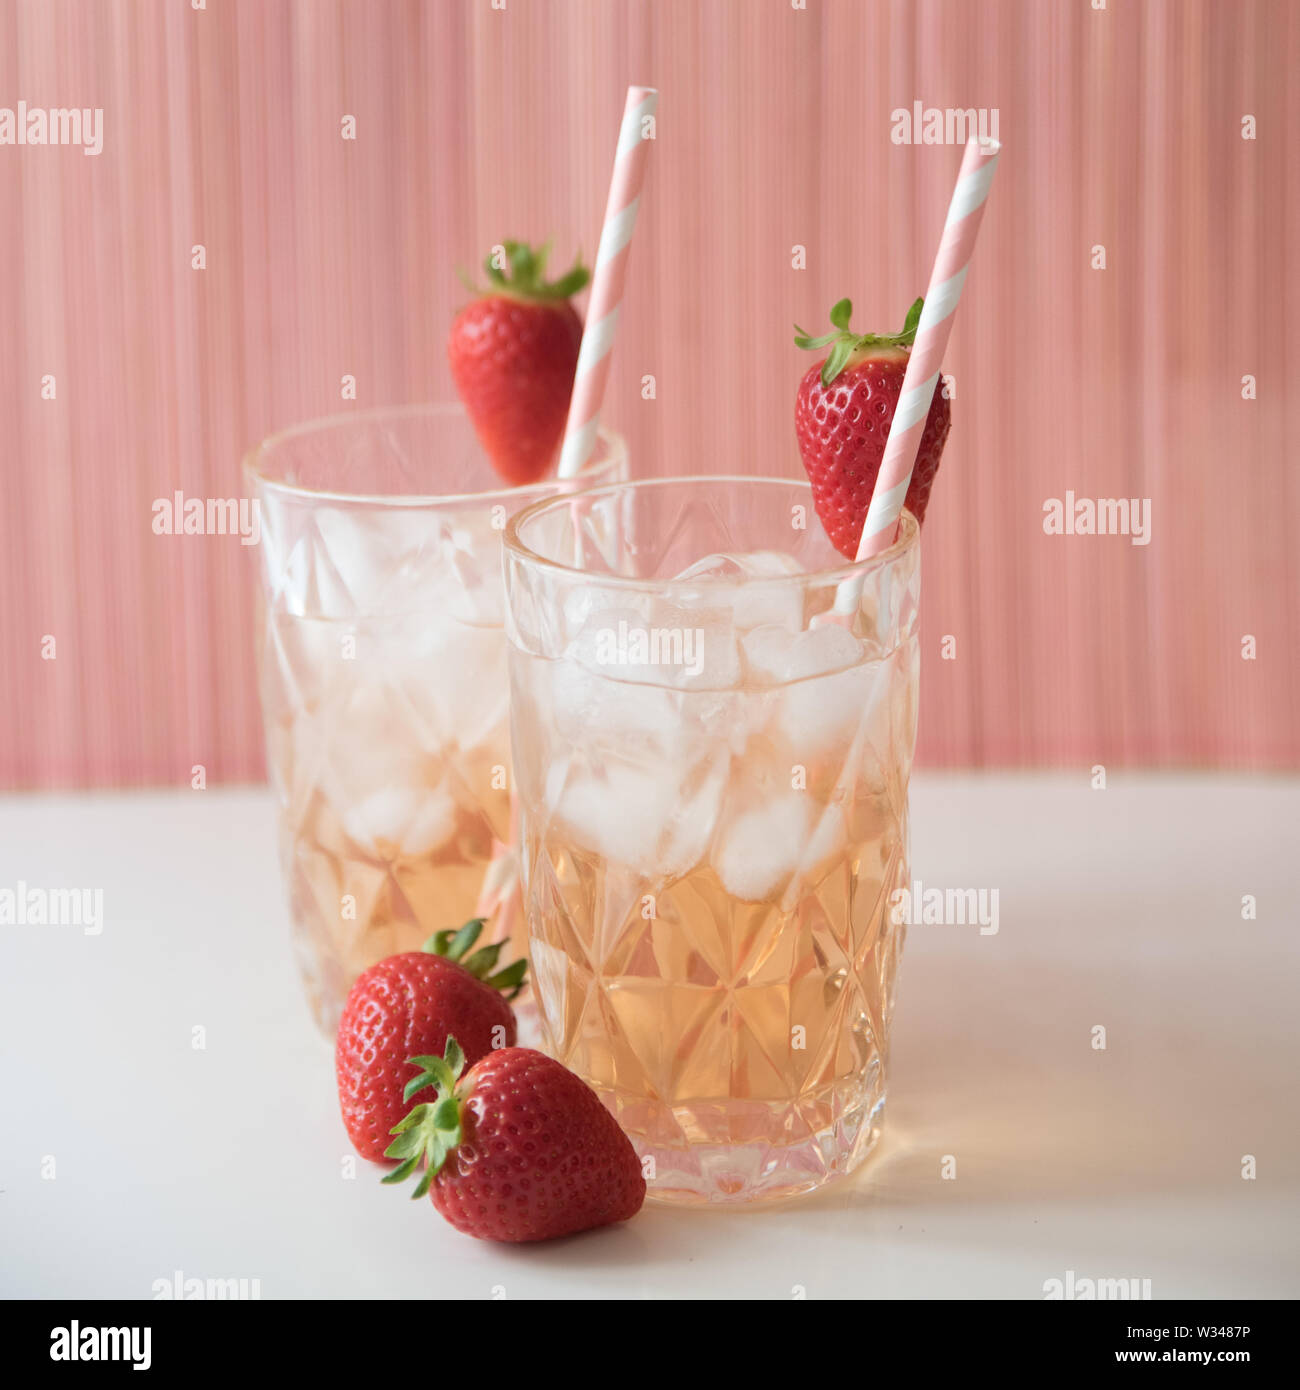 https://c8.alamy.com/comp/W3487P/pink-strawberry-cocktails-lemonade-with-ice-cubes-drinks-rose-gin-and-tonic-mojito-nonalcoholic-alcoholic-alcohol-mocktails-W3487P.jpg